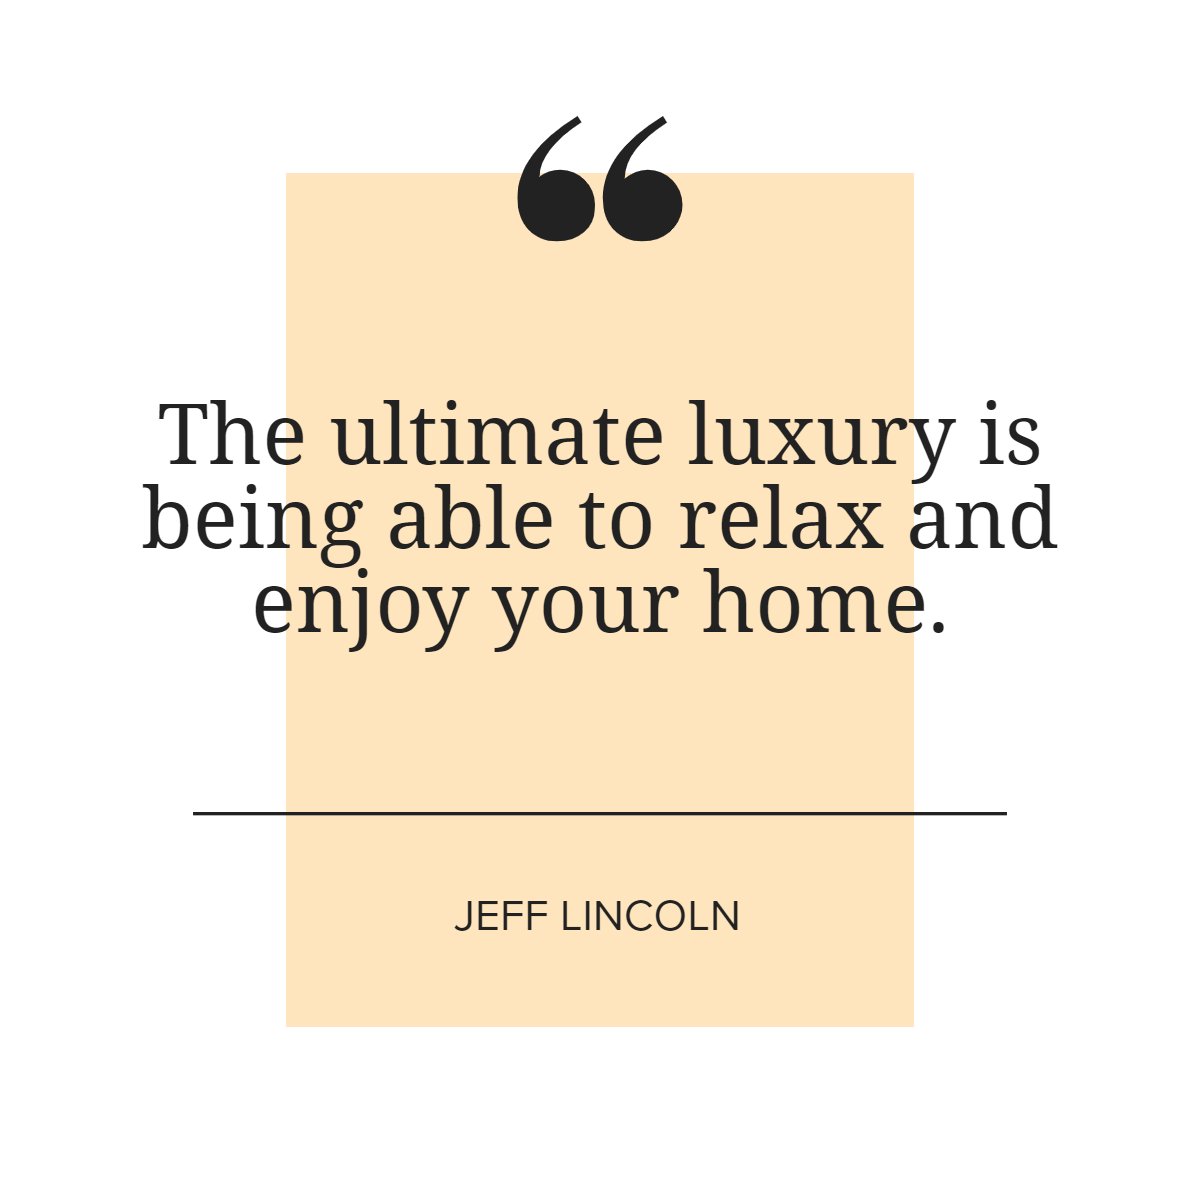 'The ultimate luxury is being able to relax and enjoy your home'
― Jeff Lincoln 📖

#luxurylifestyle #luxury #home #lifestyle #jefflincoln #quote #quoteoftheday